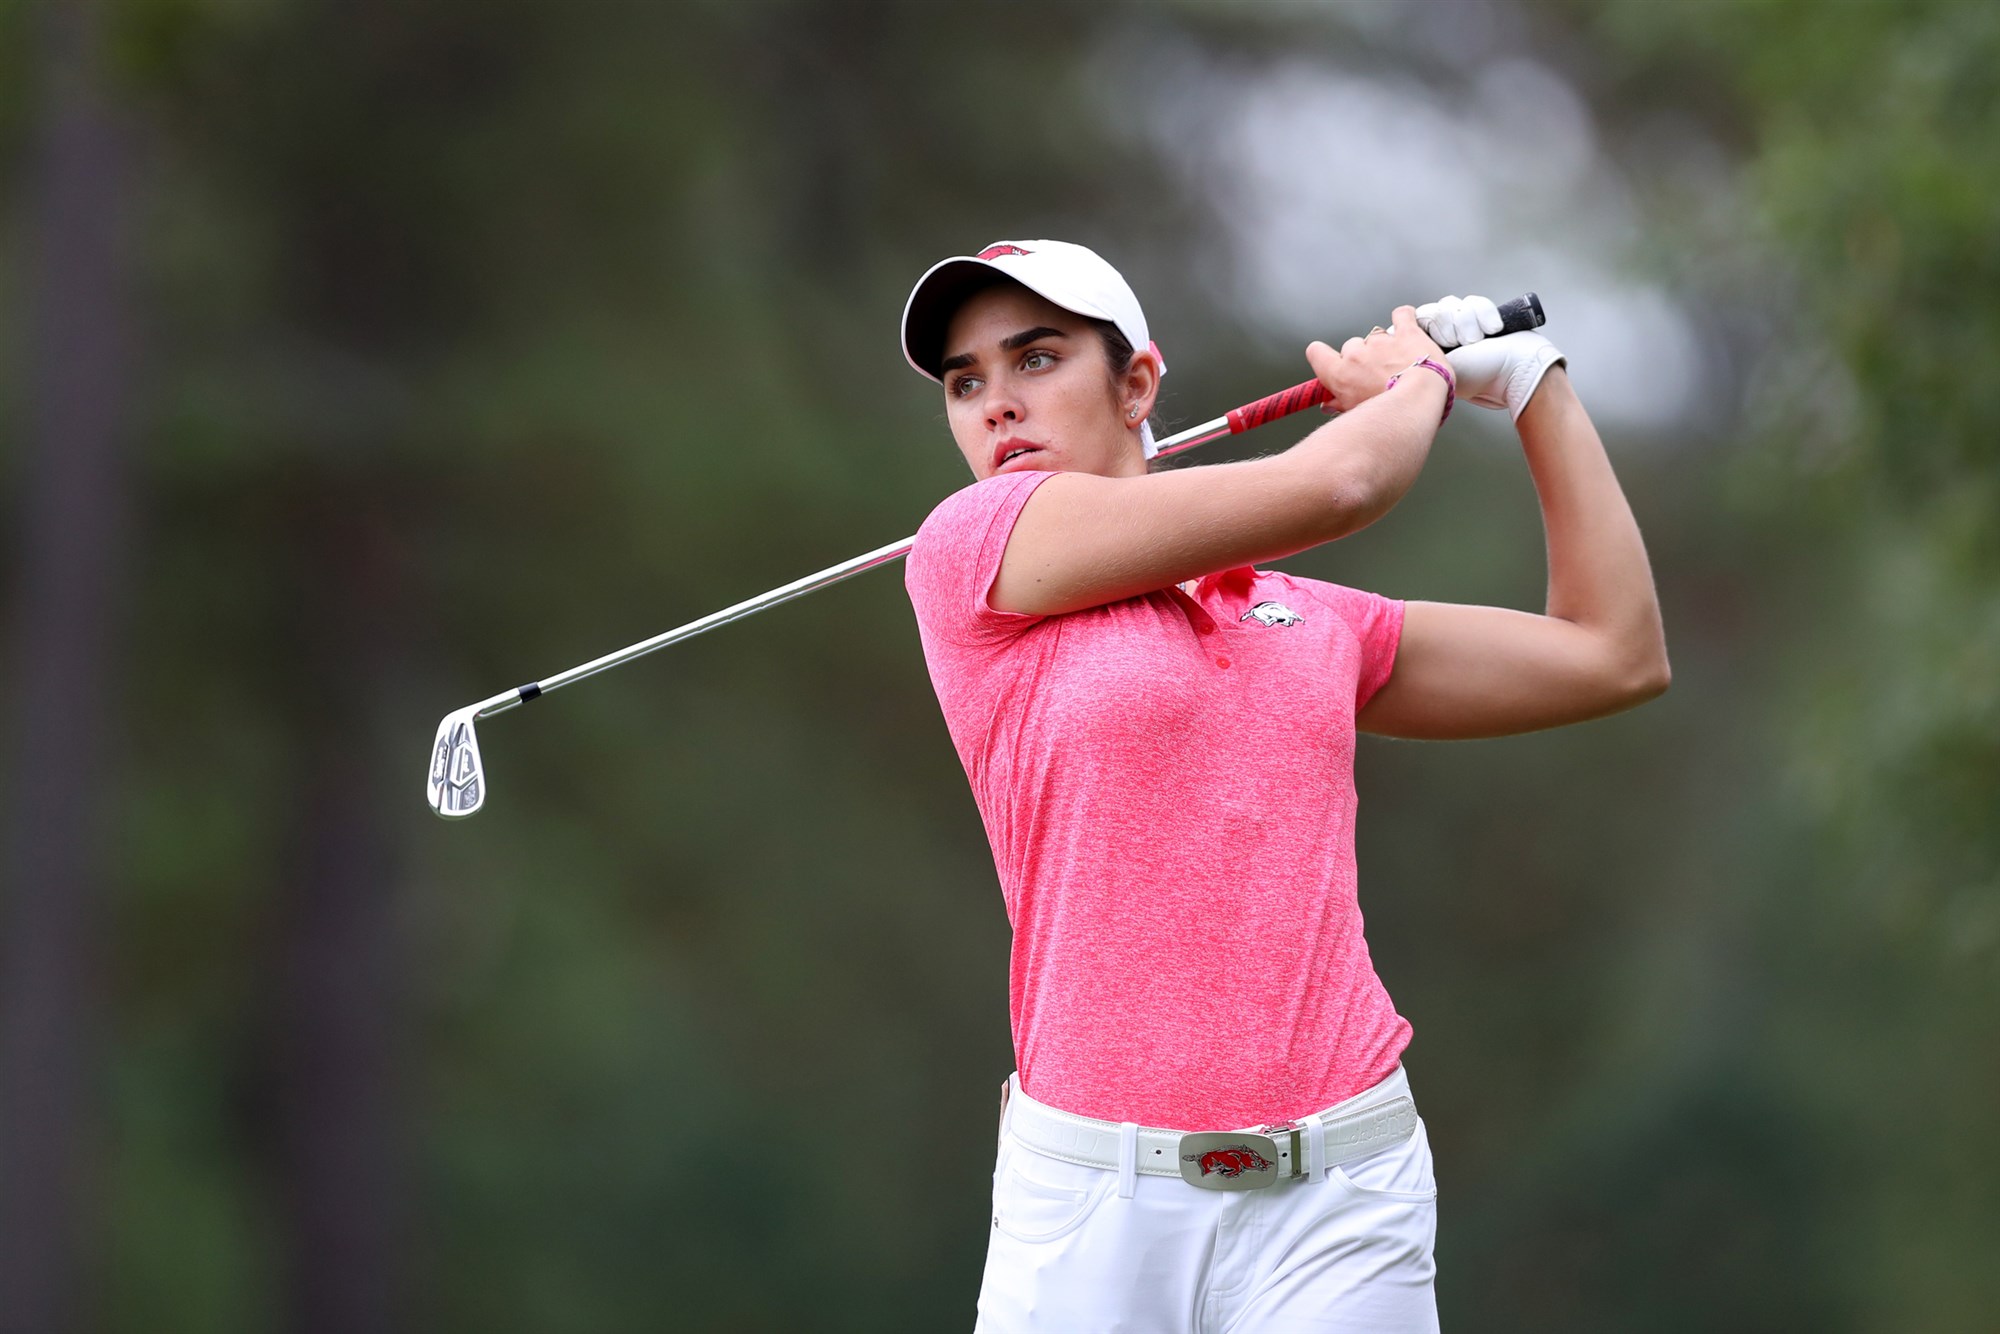 Mexican Golfer Maria Fassi Makes History